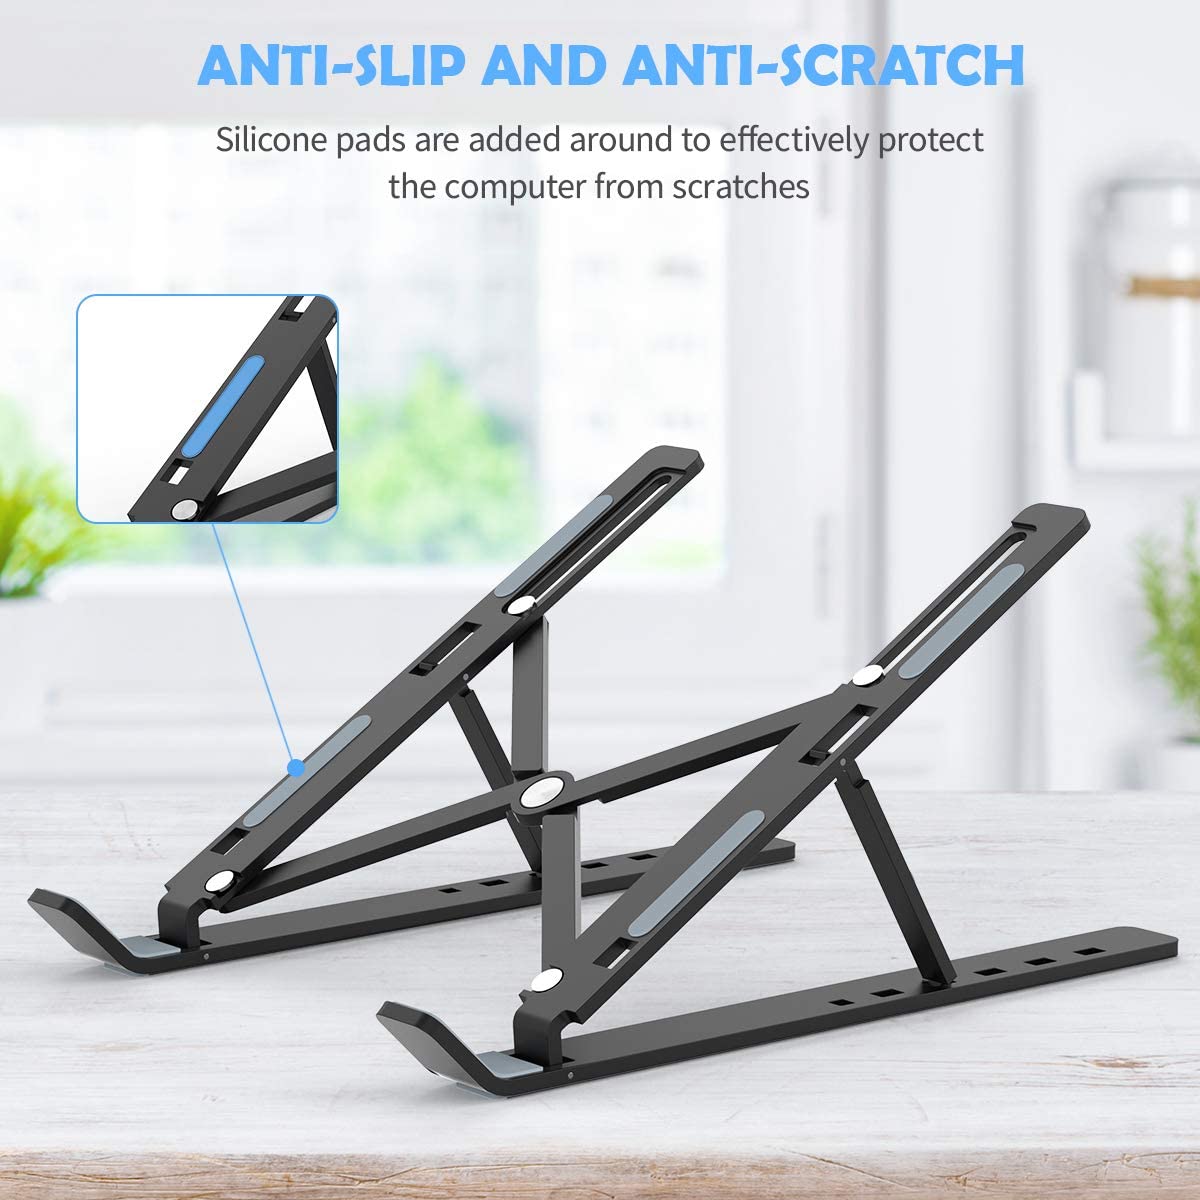 Adjustable Laptop Stand Holder with Built-in Foldable Legs